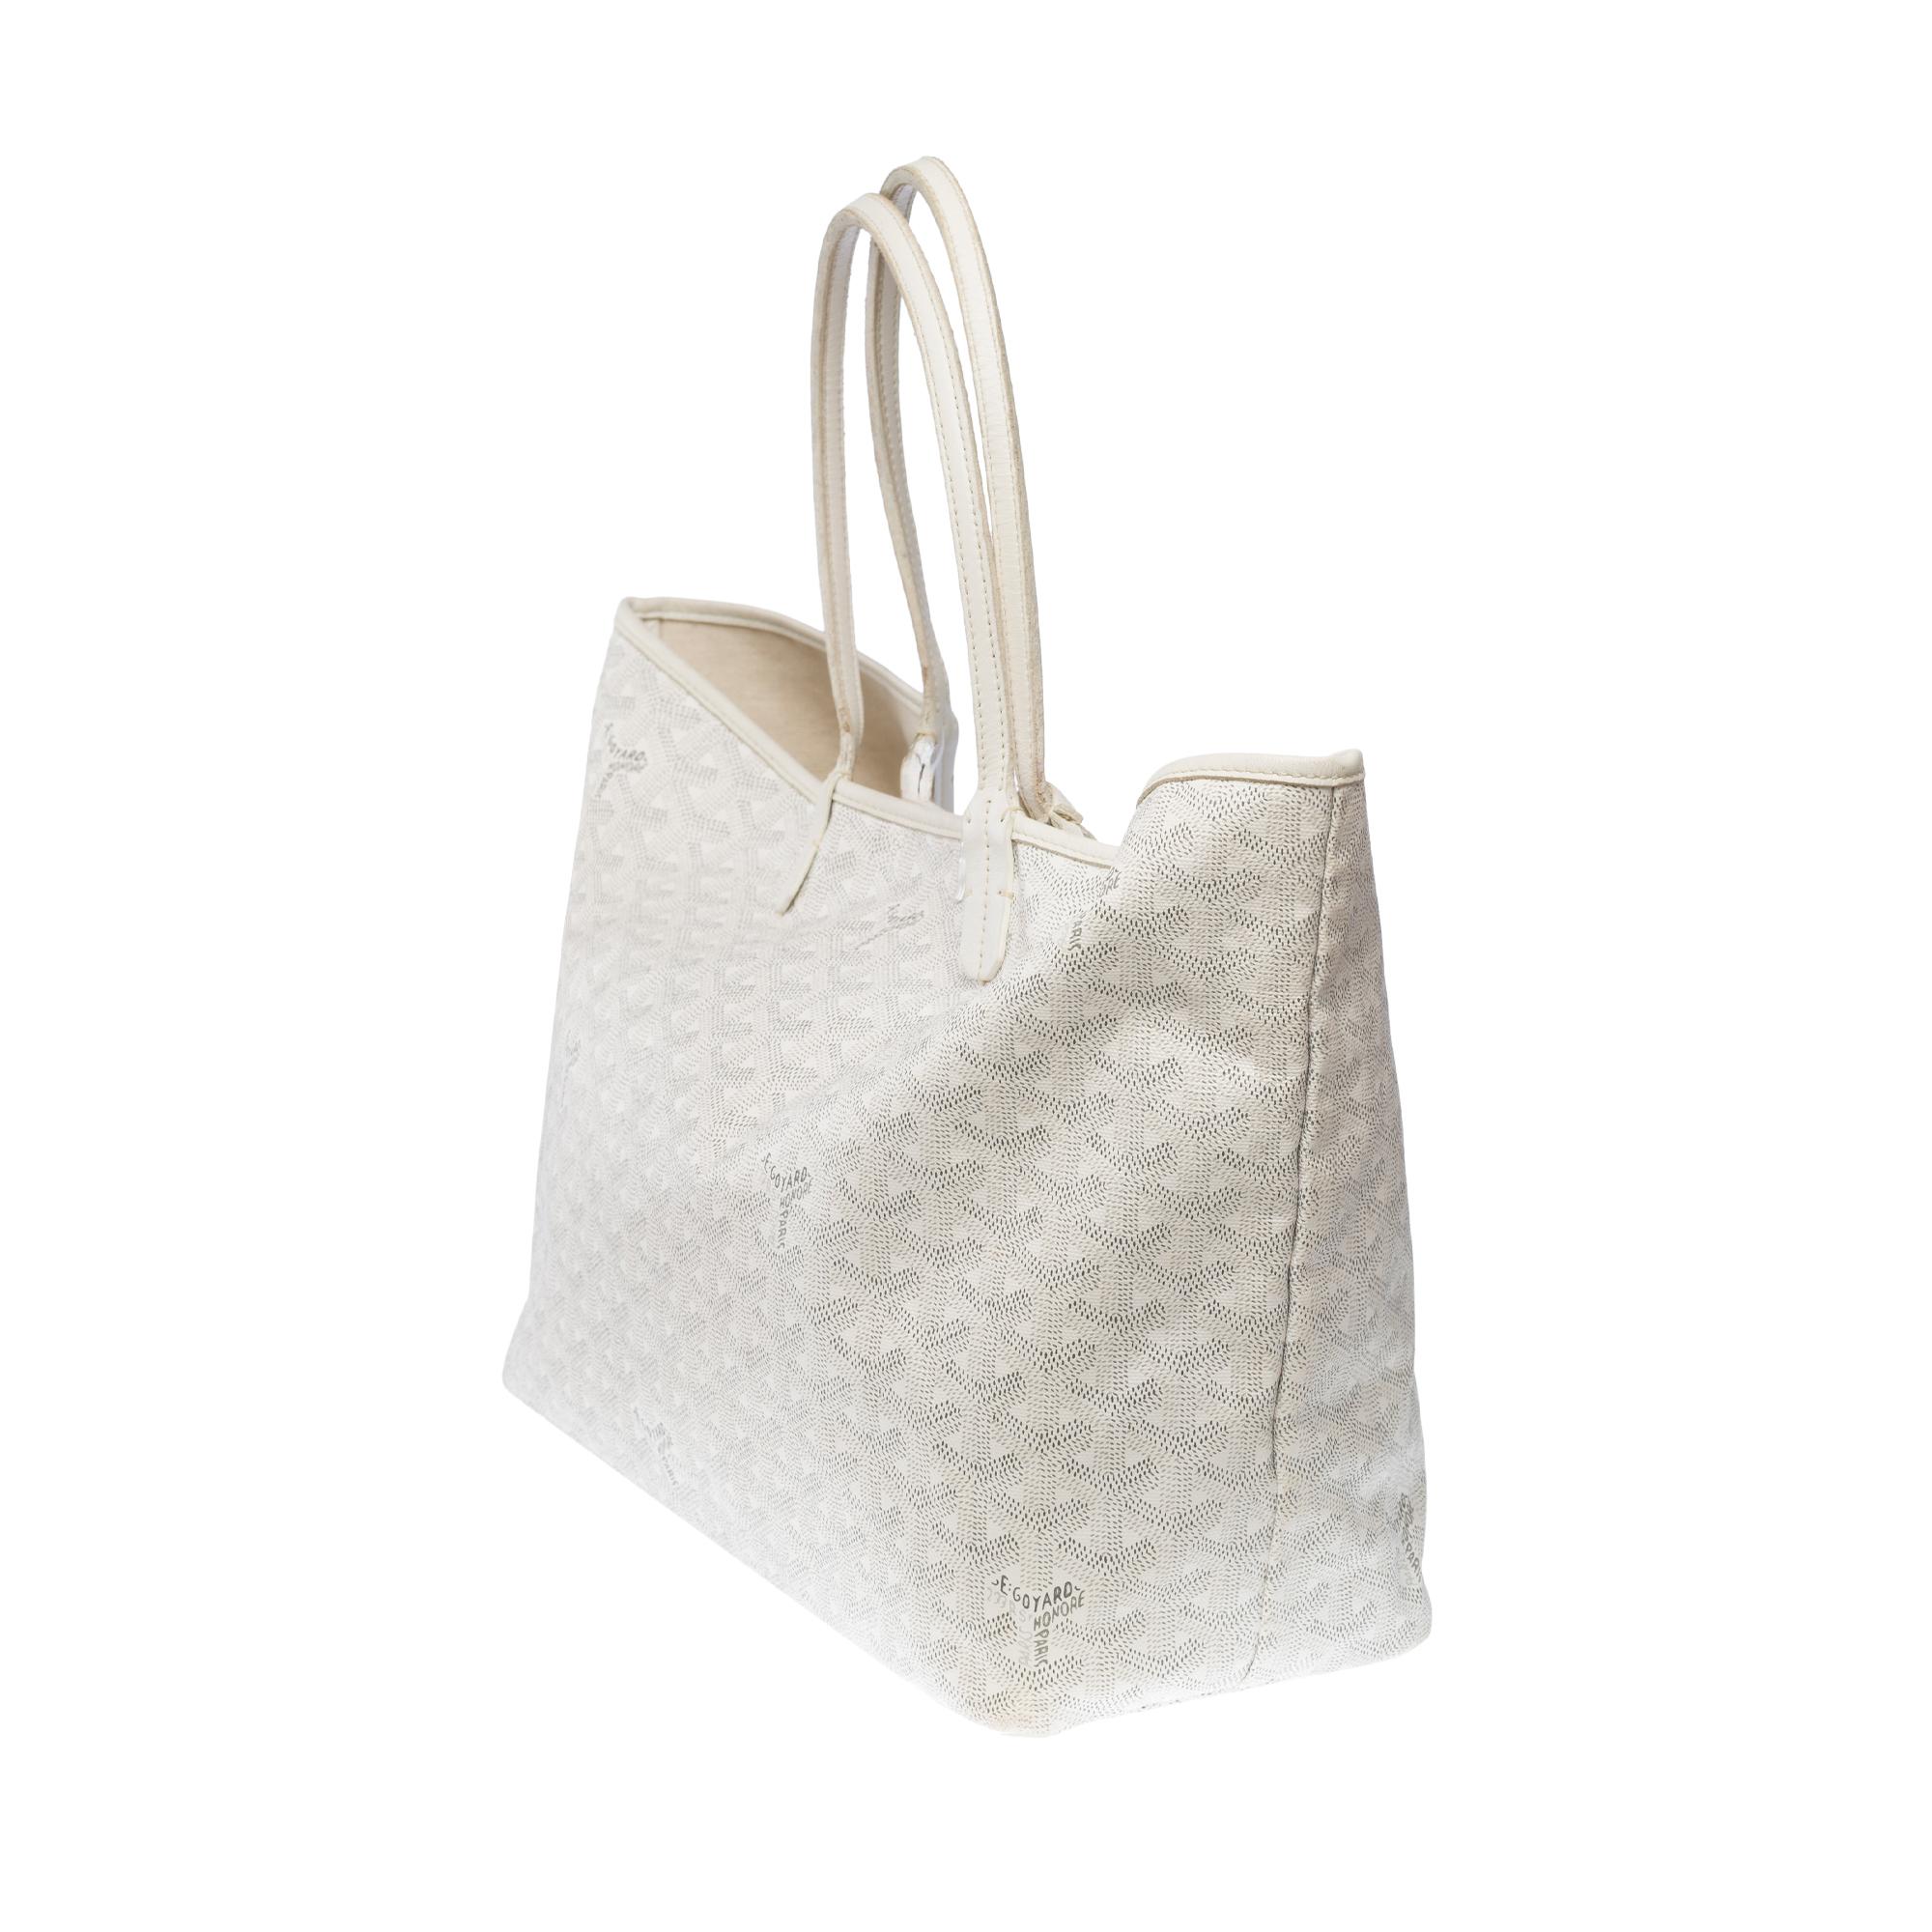 The Coveted Goyard Saint-Louis PM Tote bag in White canvas and leather, SHW For Sale 2